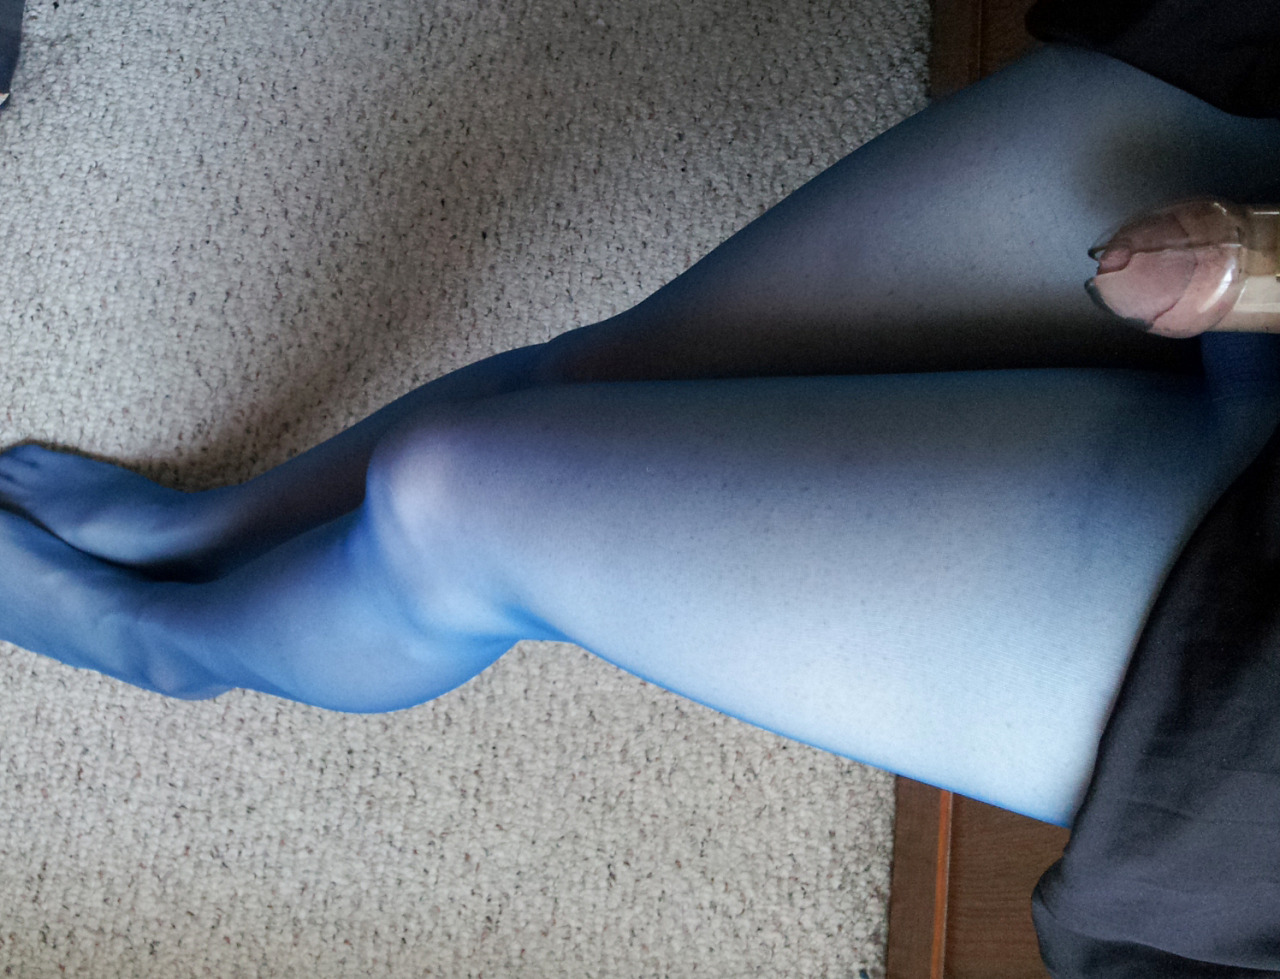 sarisstg:  I don’t think its any secret I’m a fan of pantyhose. Turns out so